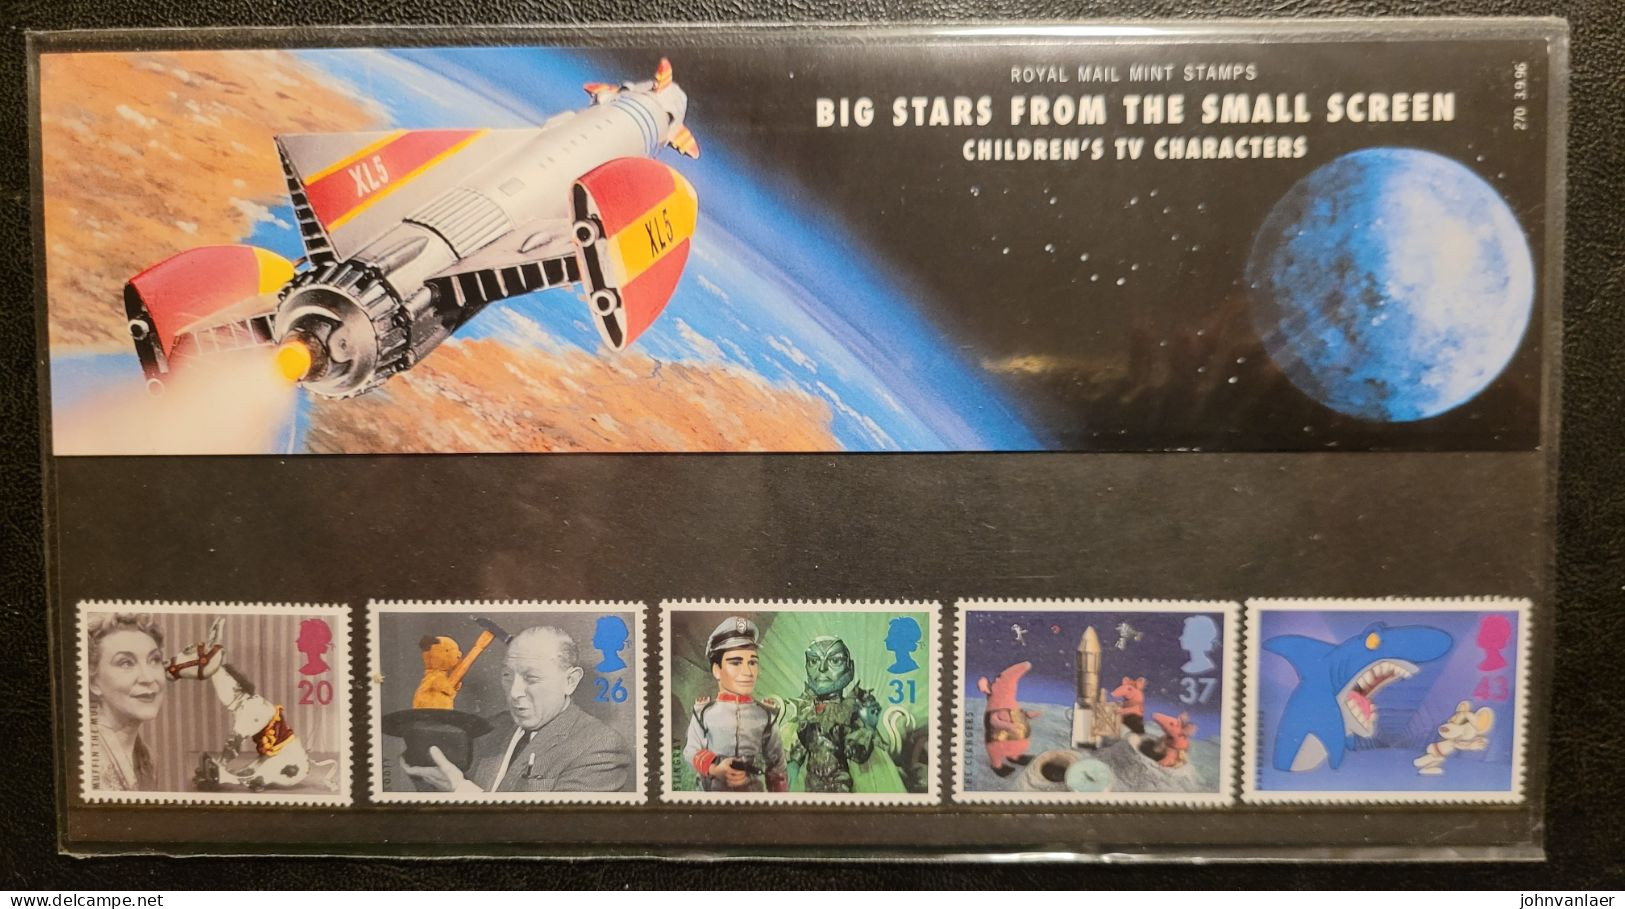 1996 UK ROYAL MAIL PRESENTATION PACK BIG STARS FROM THE SMALL SCREEN DECIMAL STAMPS - Presentation Packs